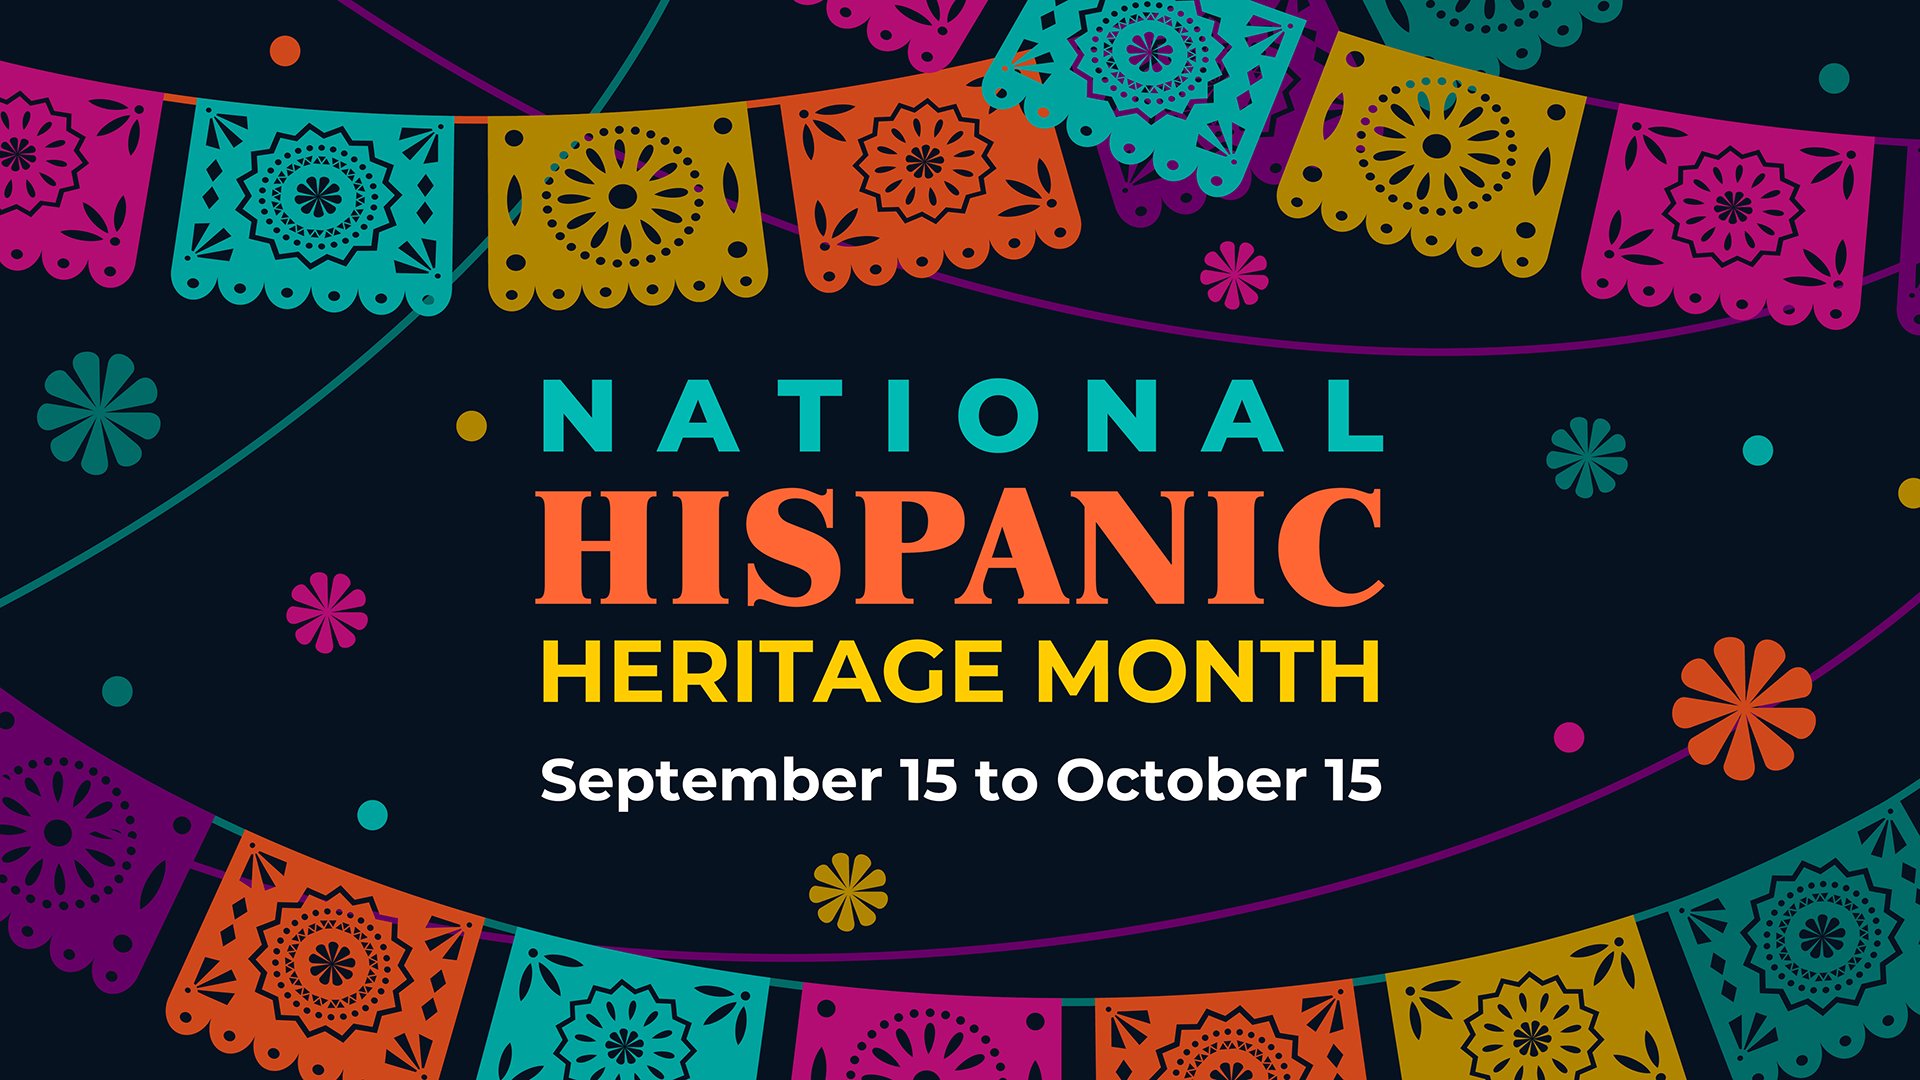 Featured image for “Celebrate National Hispanic Heritage Month”